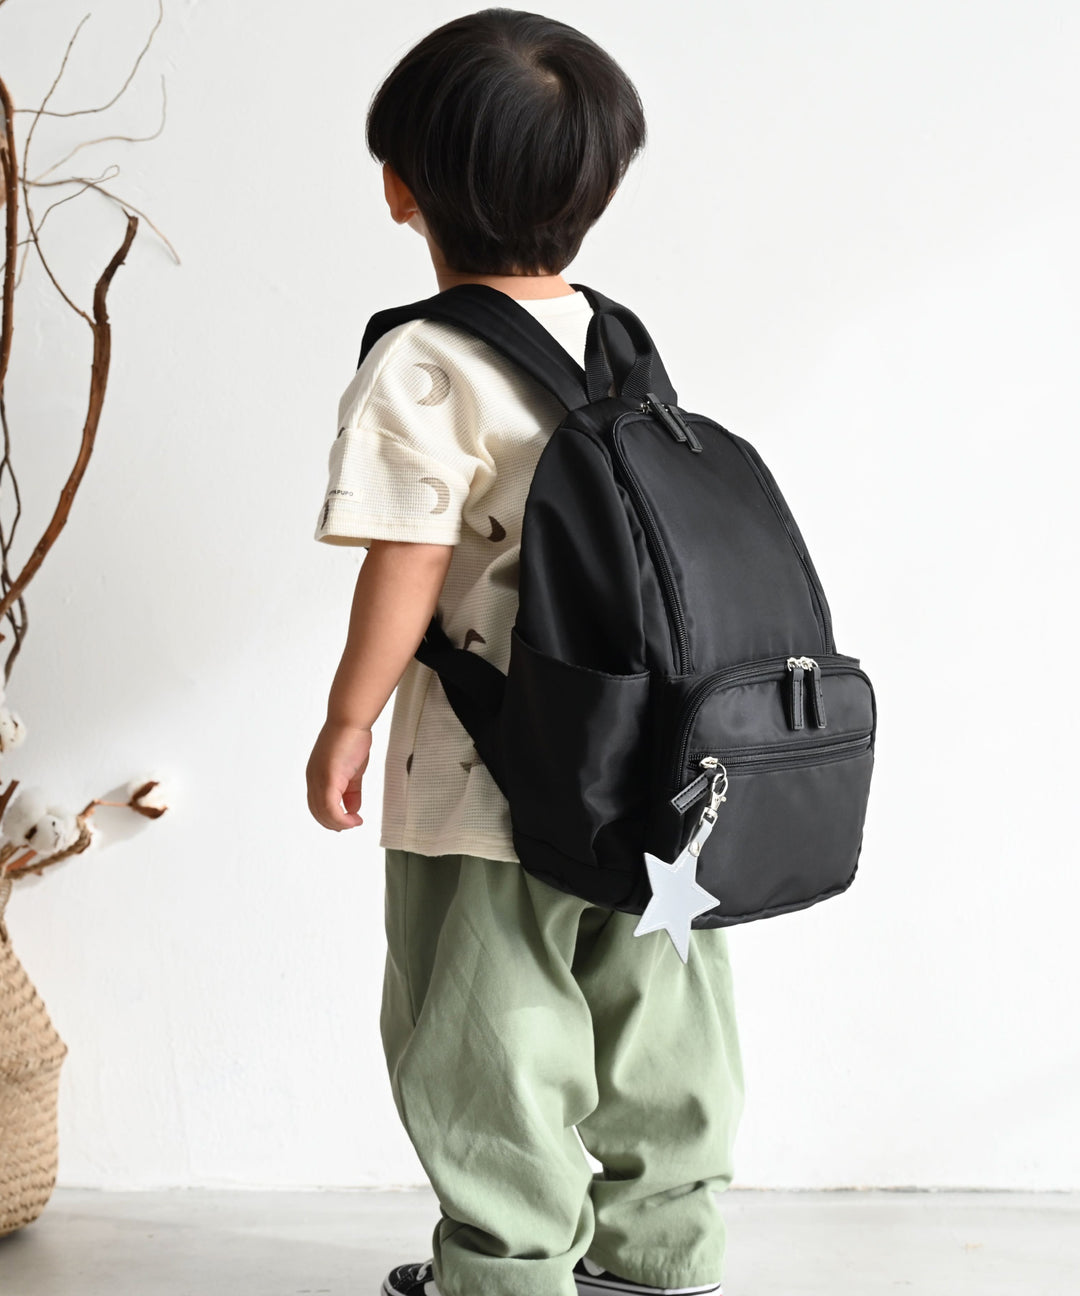 Kids' backpack with charm